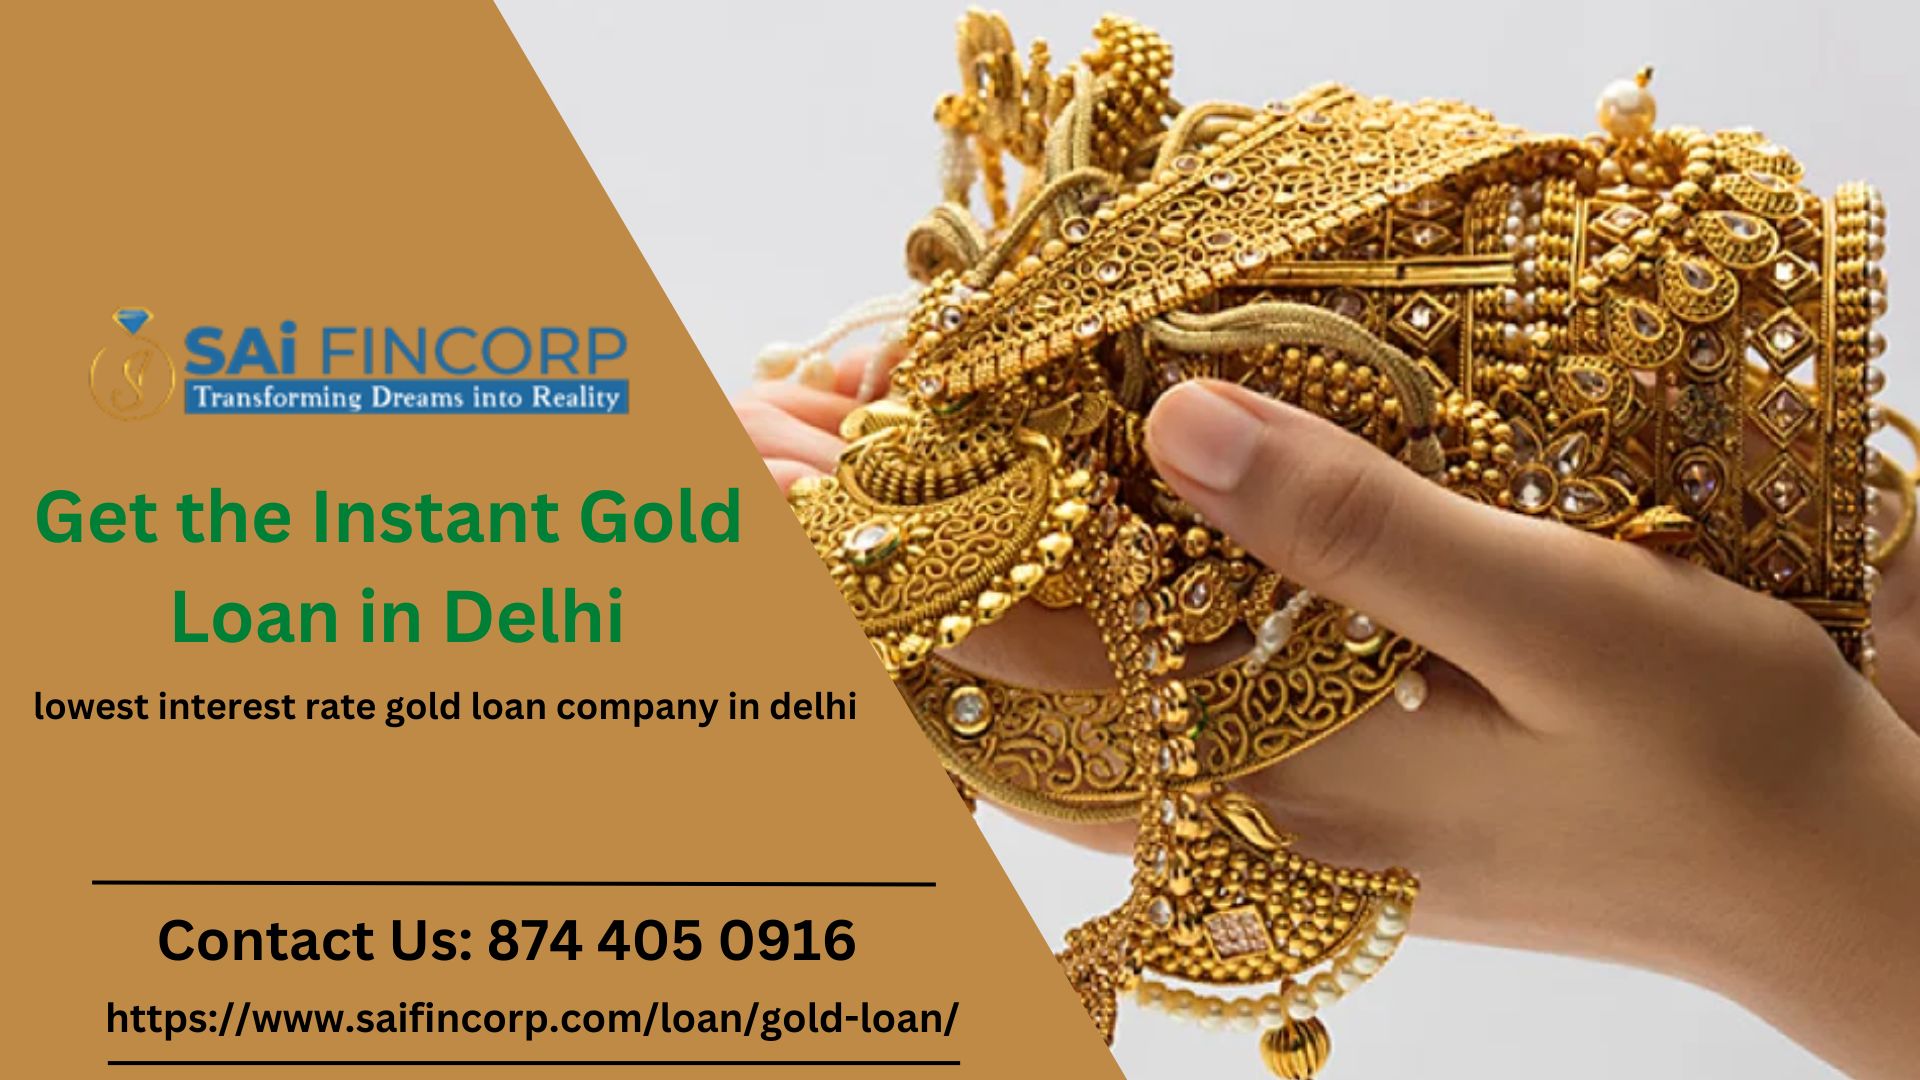 Get Instant Gold Loan in Delhi at Sai Fincorp